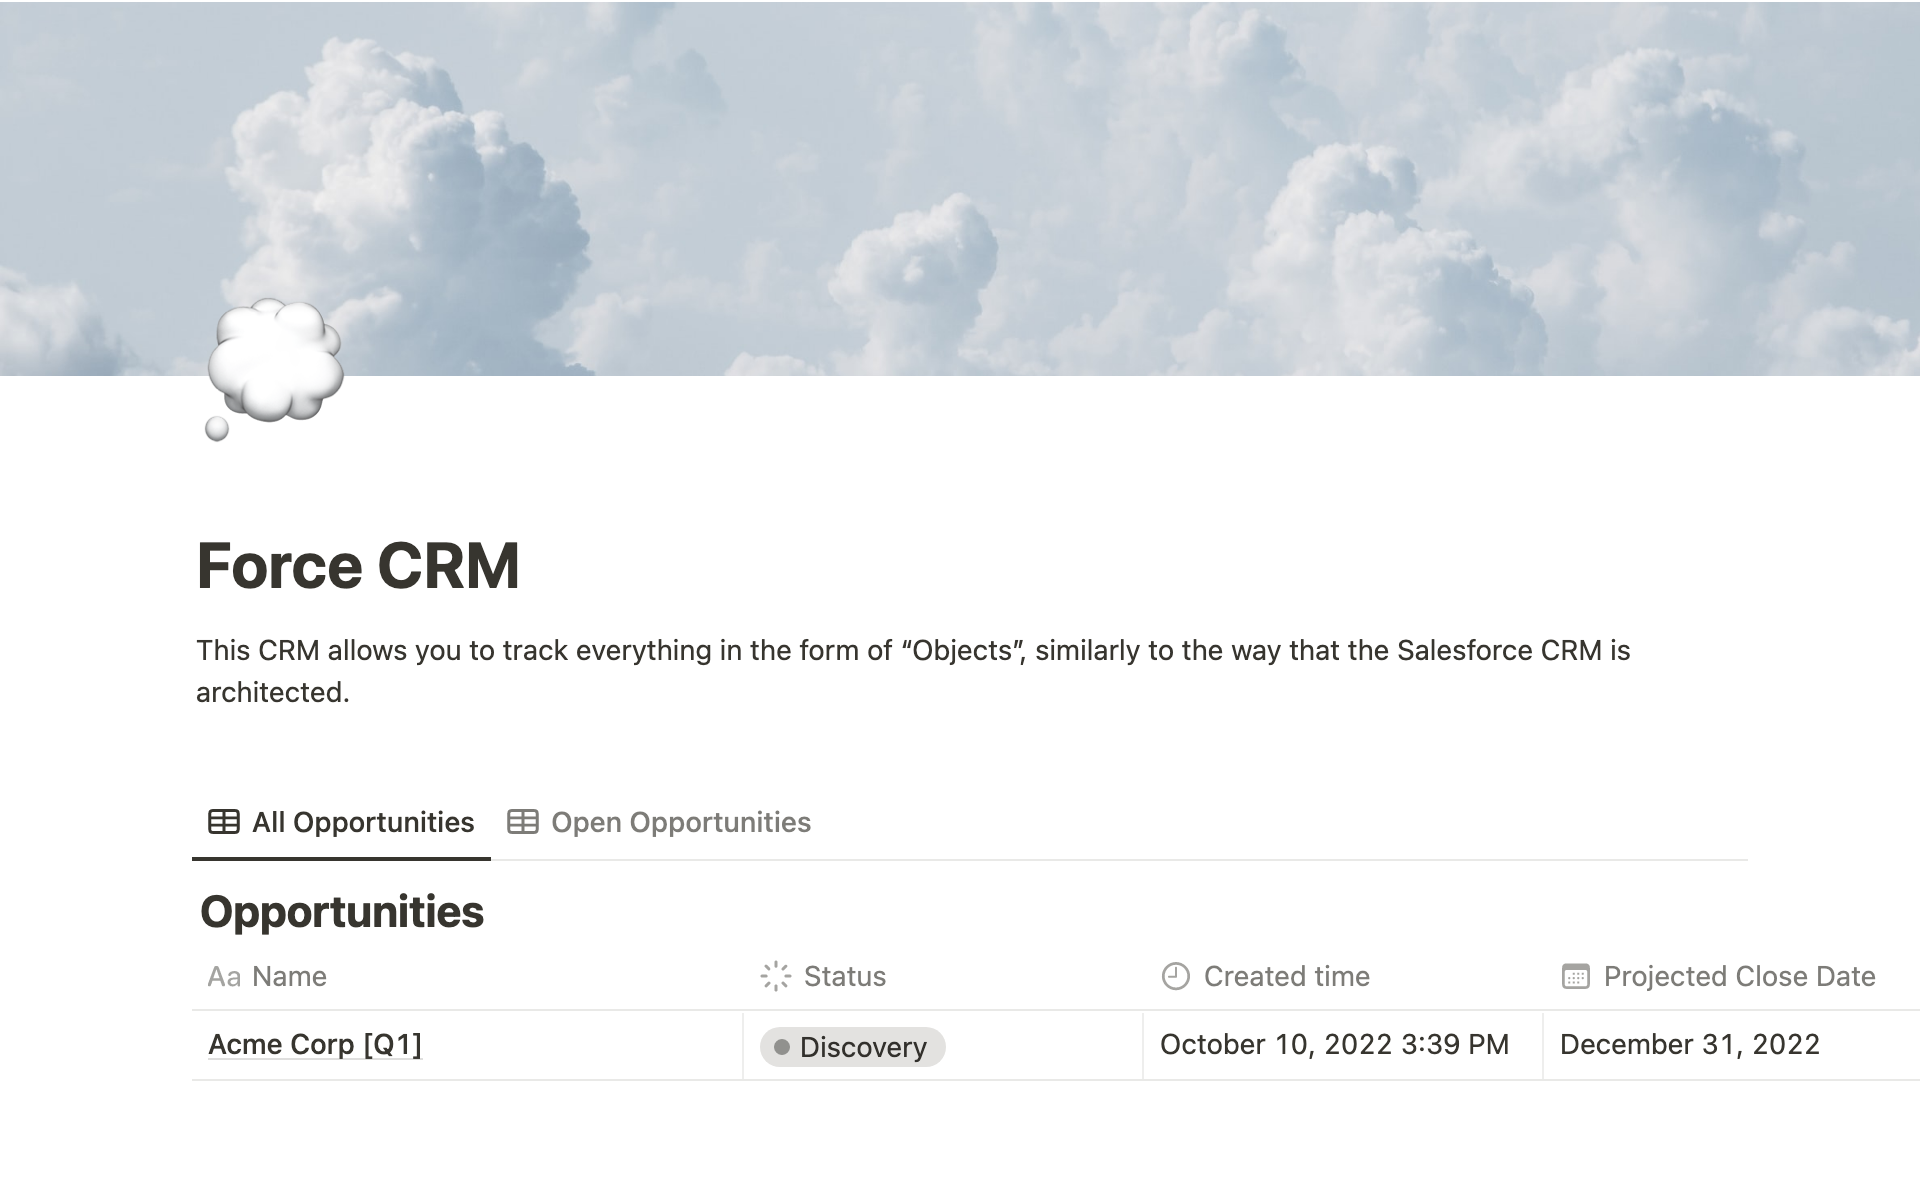 This CRM allows you to track everything in the form of “Objects”, similarly to the way that the Salesforce CRM is architected.